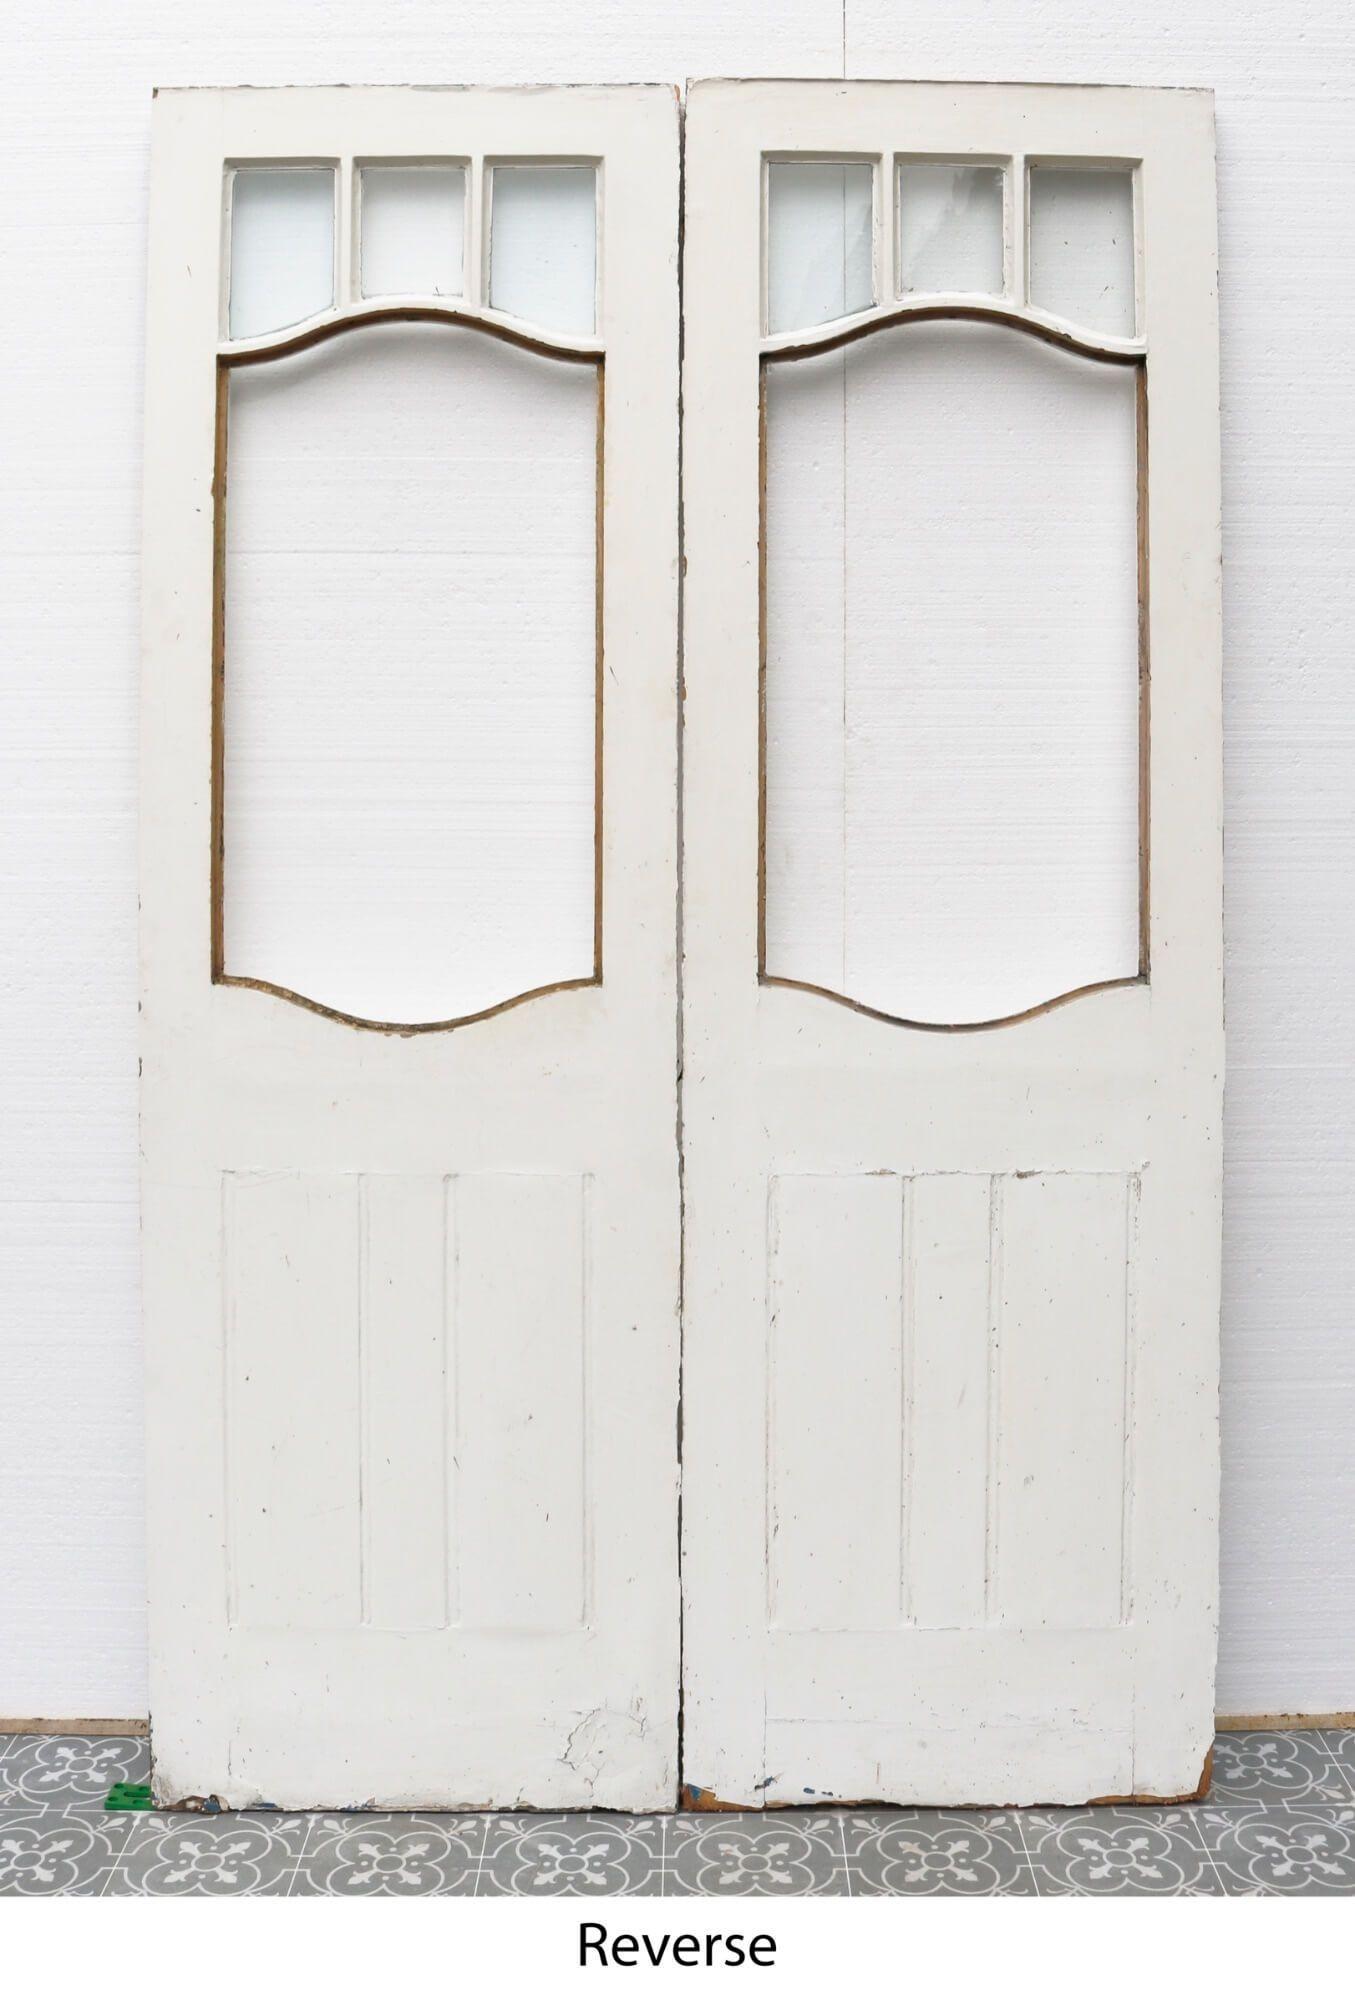 Glazed Victorian Internal or External Double Doors In Fair Condition For Sale In Wormelow, Herefordshire